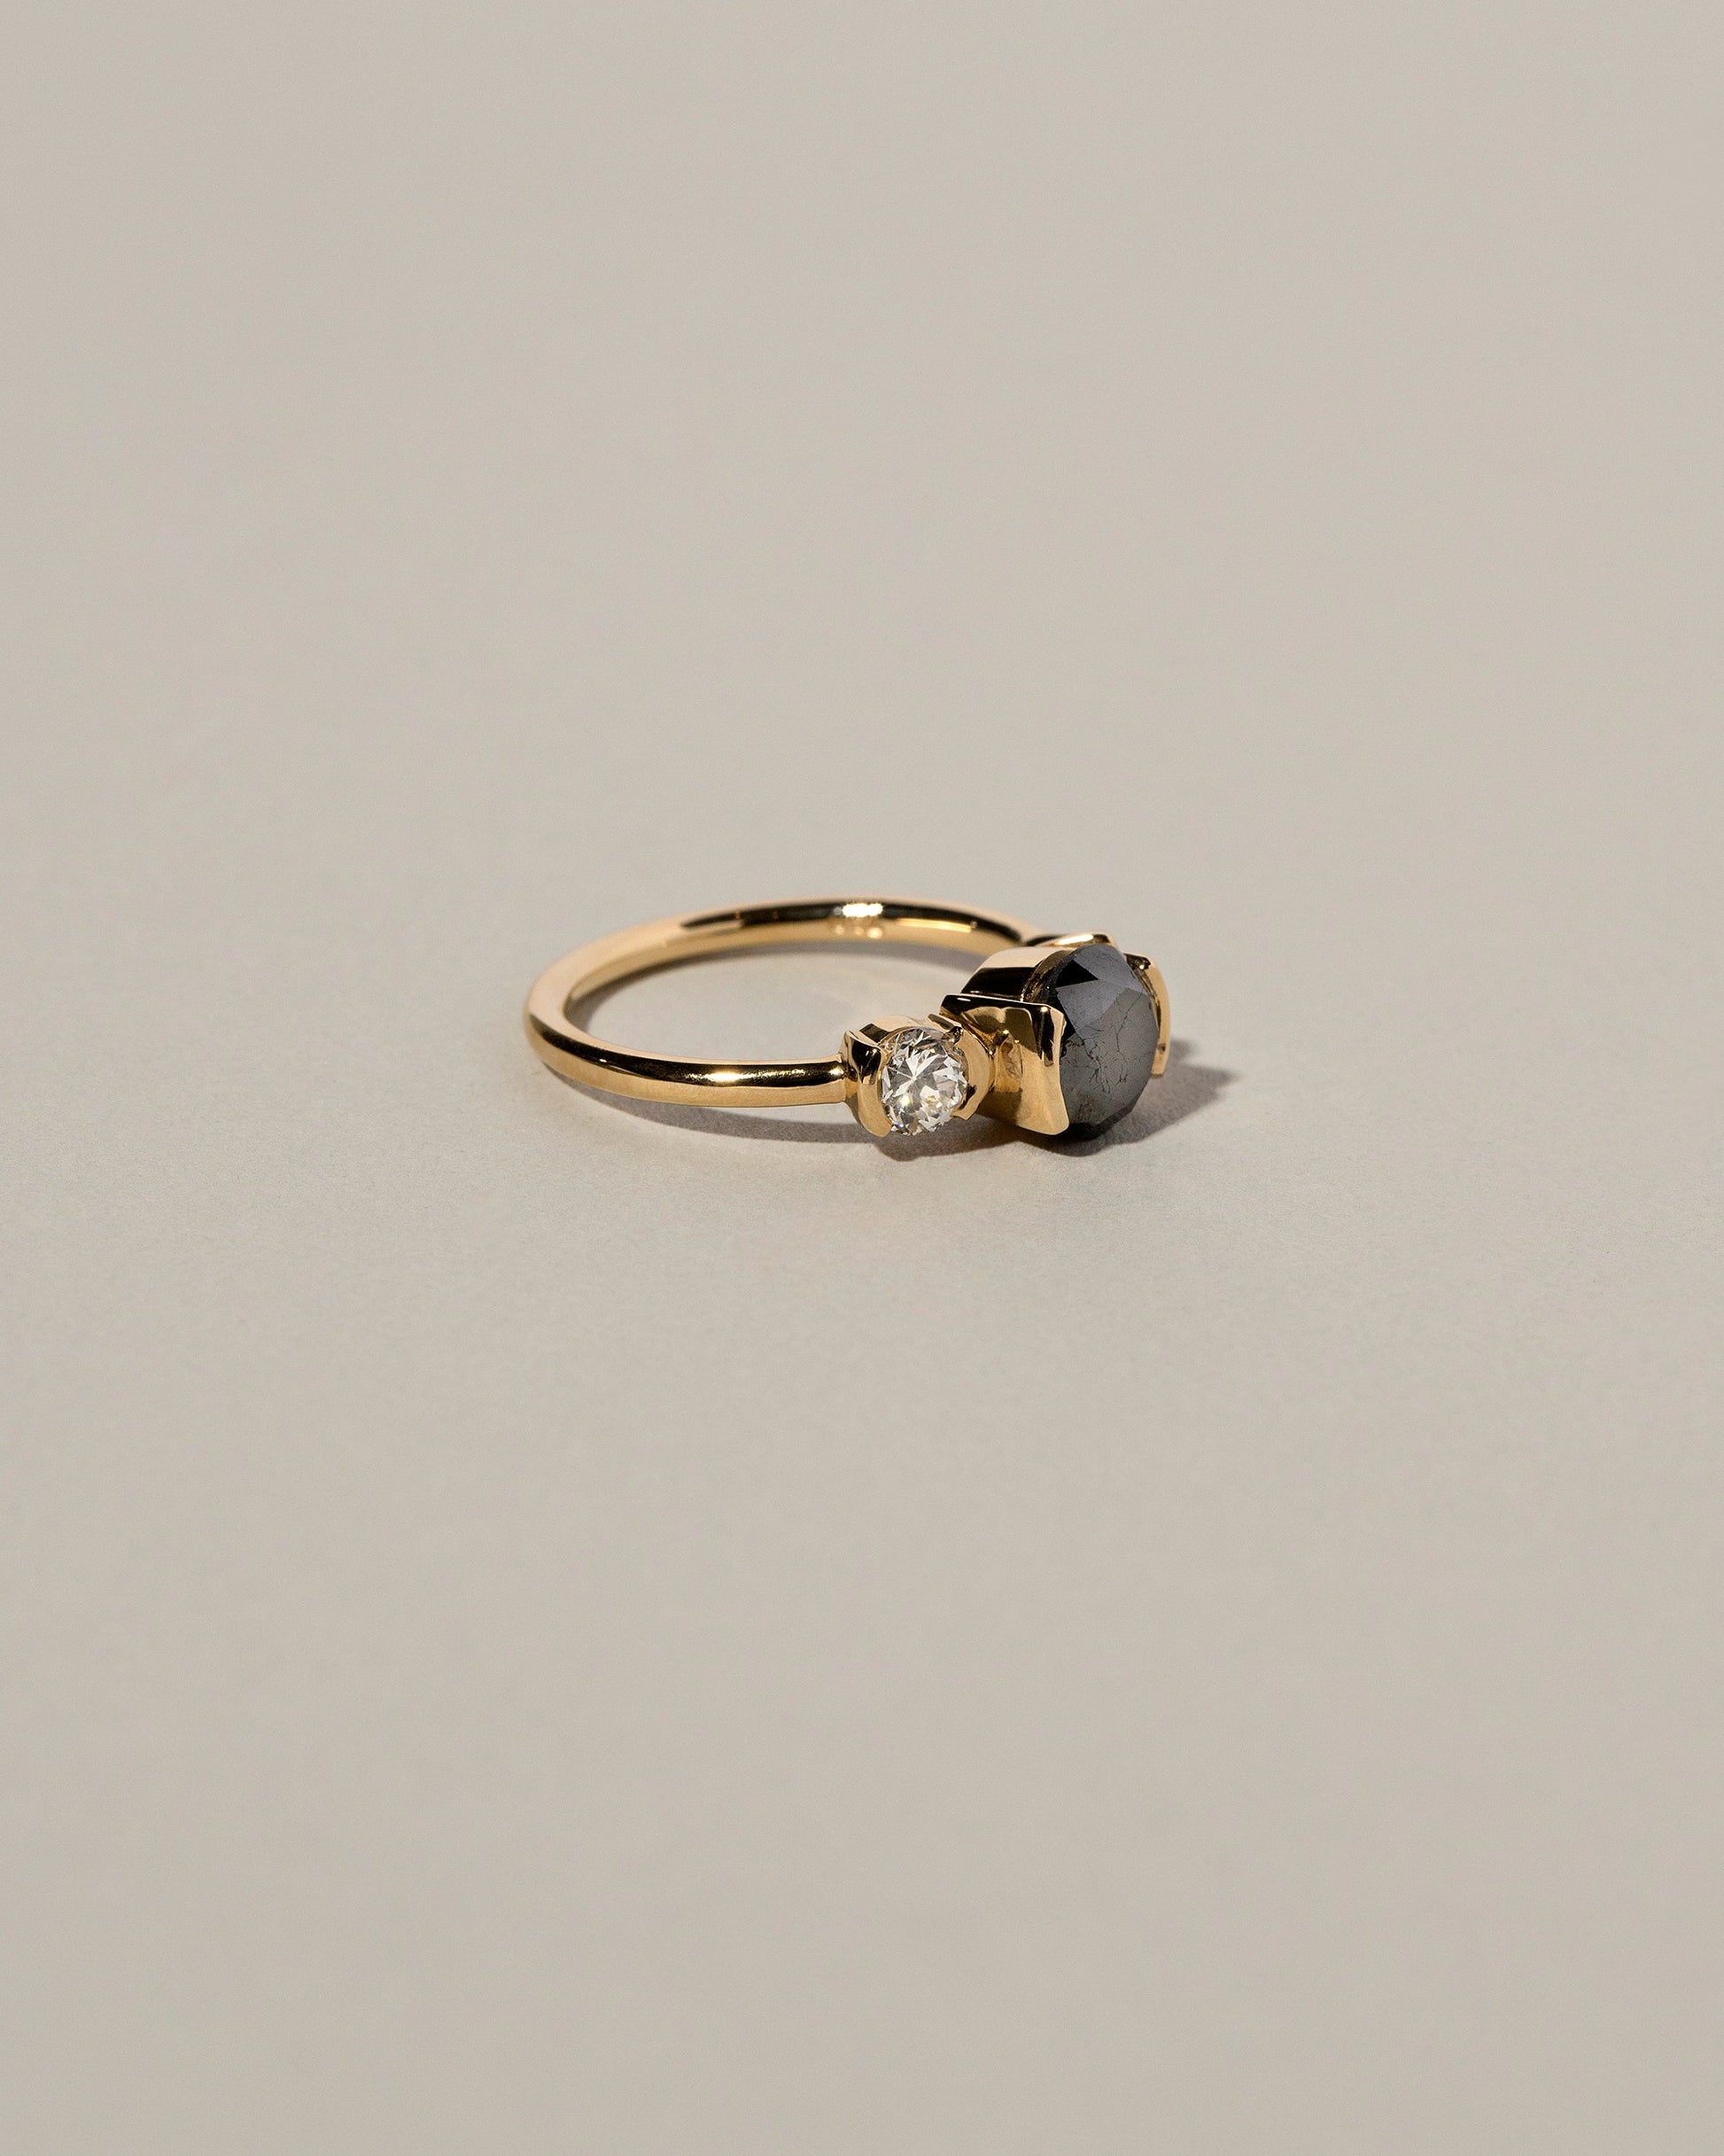  Black and White Diamond Ring on light color background.